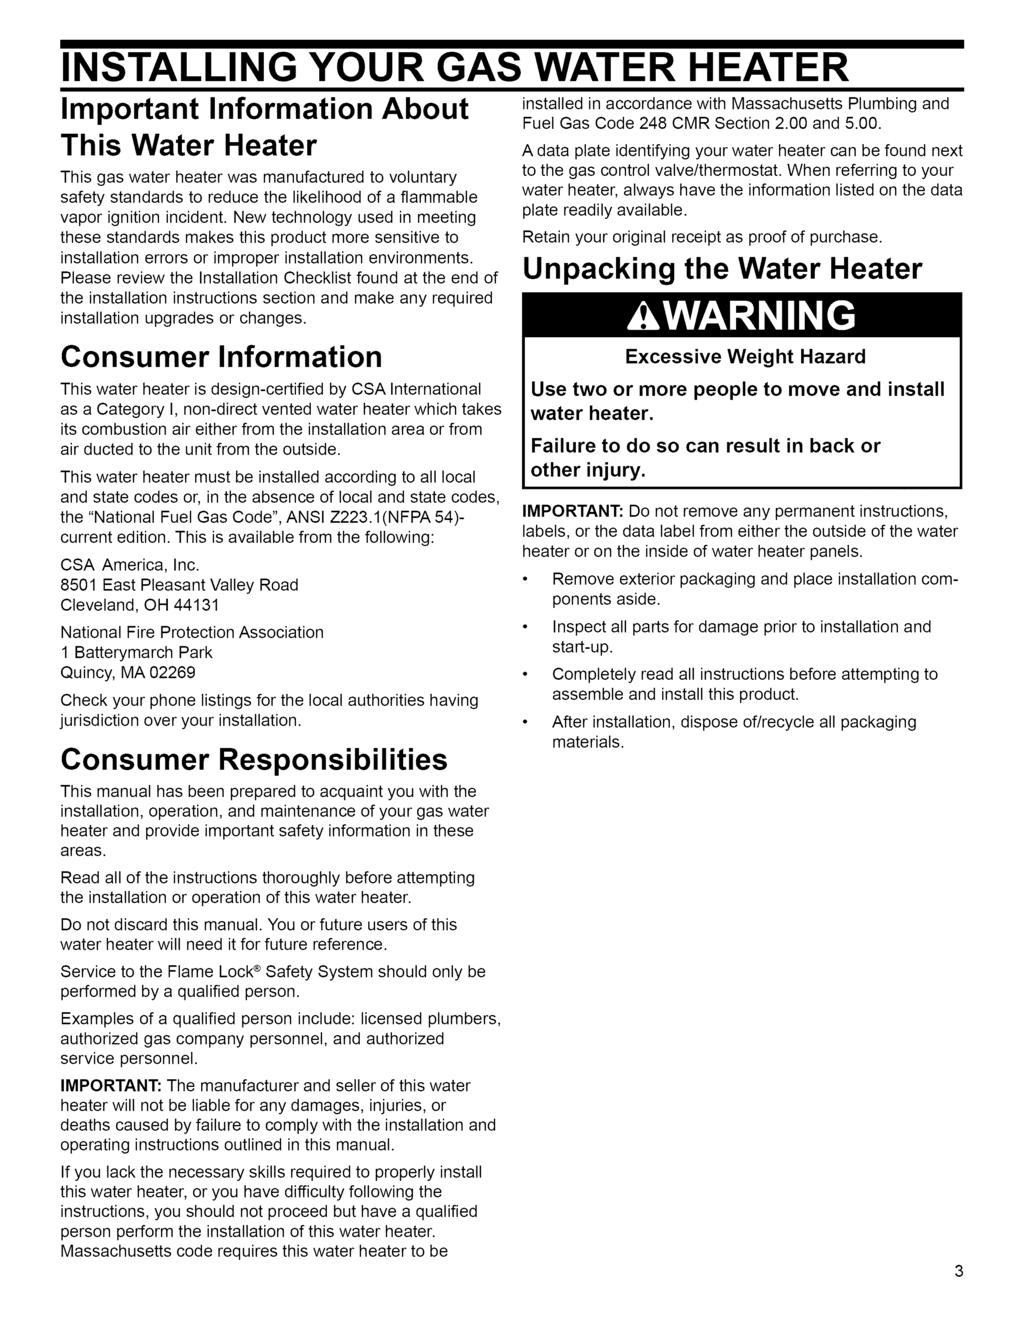 INSTALLING YOUR GAS WATER HEATER Important Information About This Water Heater This gas water heater was manufactured to voluntary safety standards to reduce the likelihood of a flammable vapor